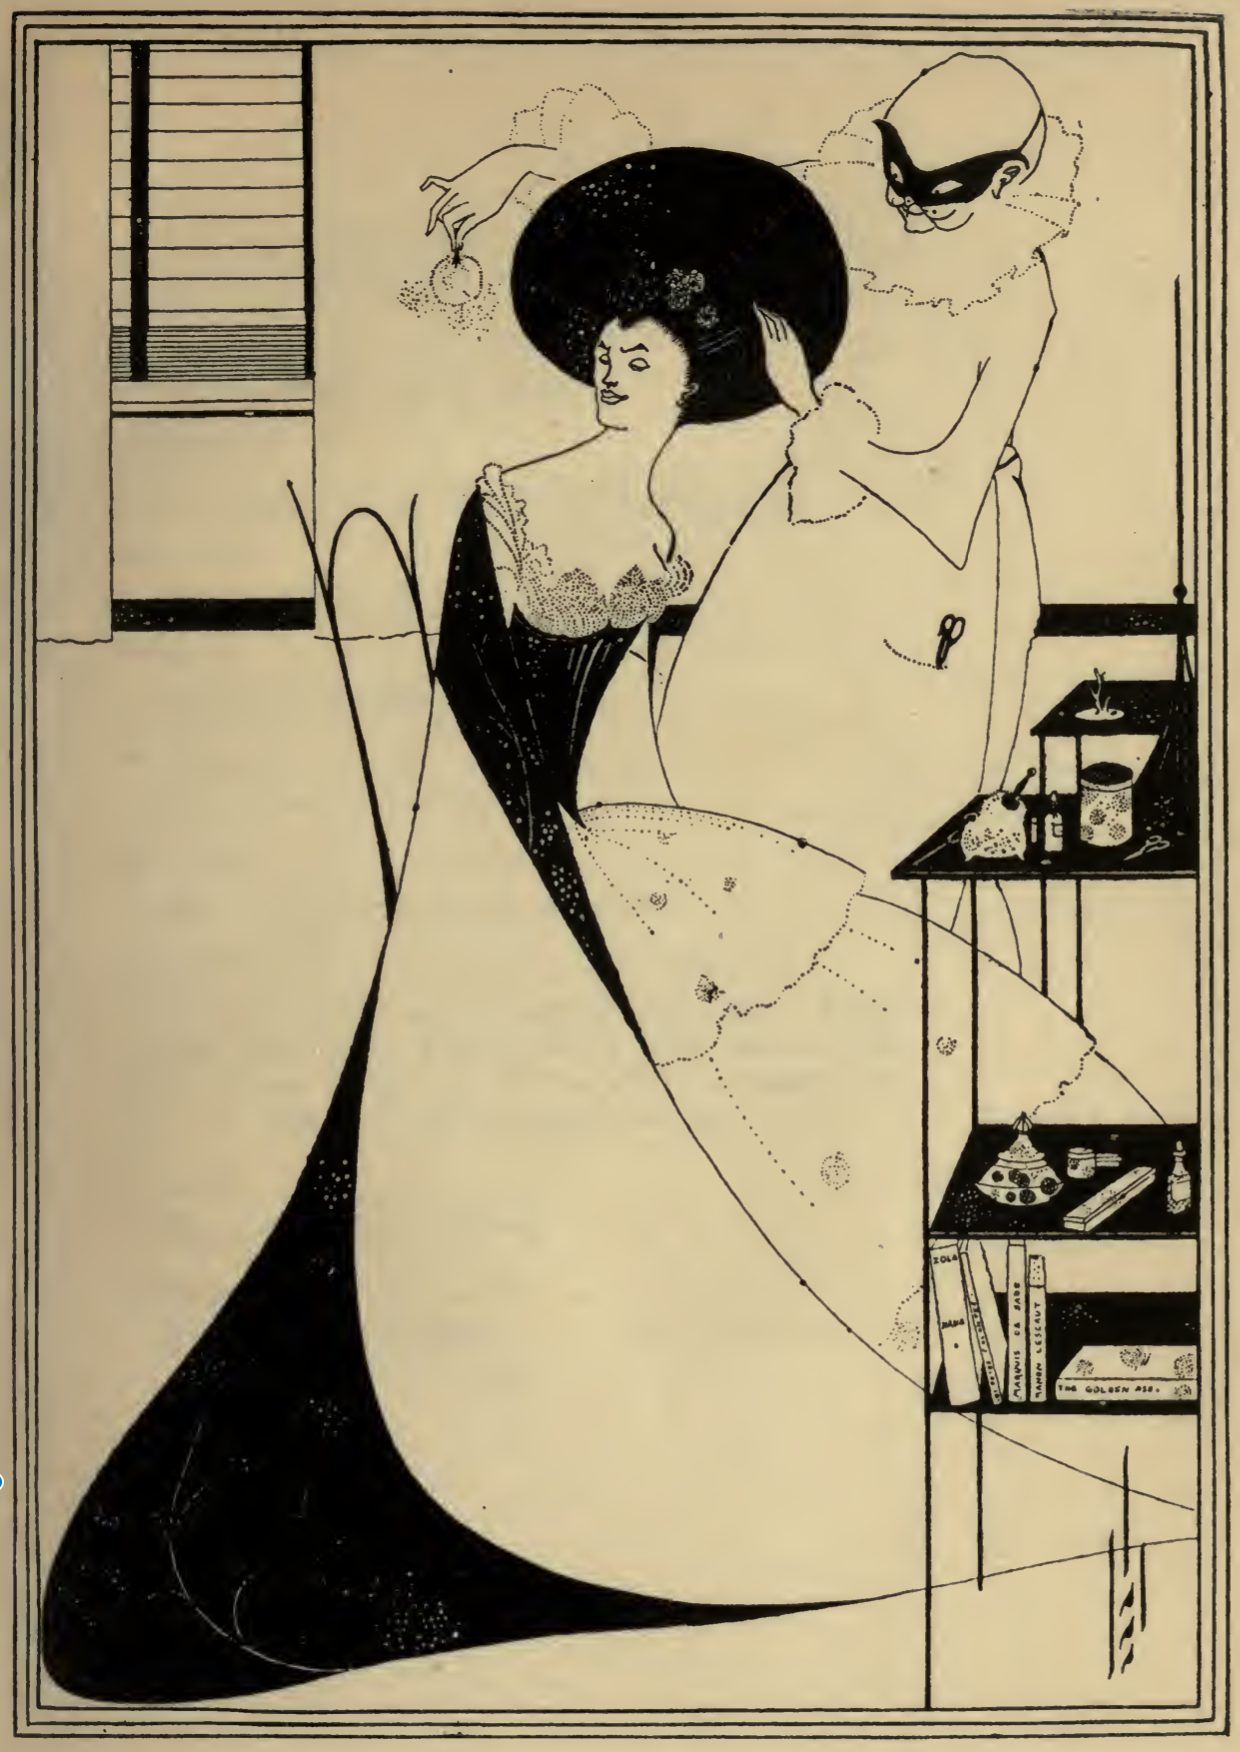 Illustration of Salome by Aubrey Beardsley. Salome is pictured in Victorian dress being groomed by a Pierrot-Harlequin figure in a mask.